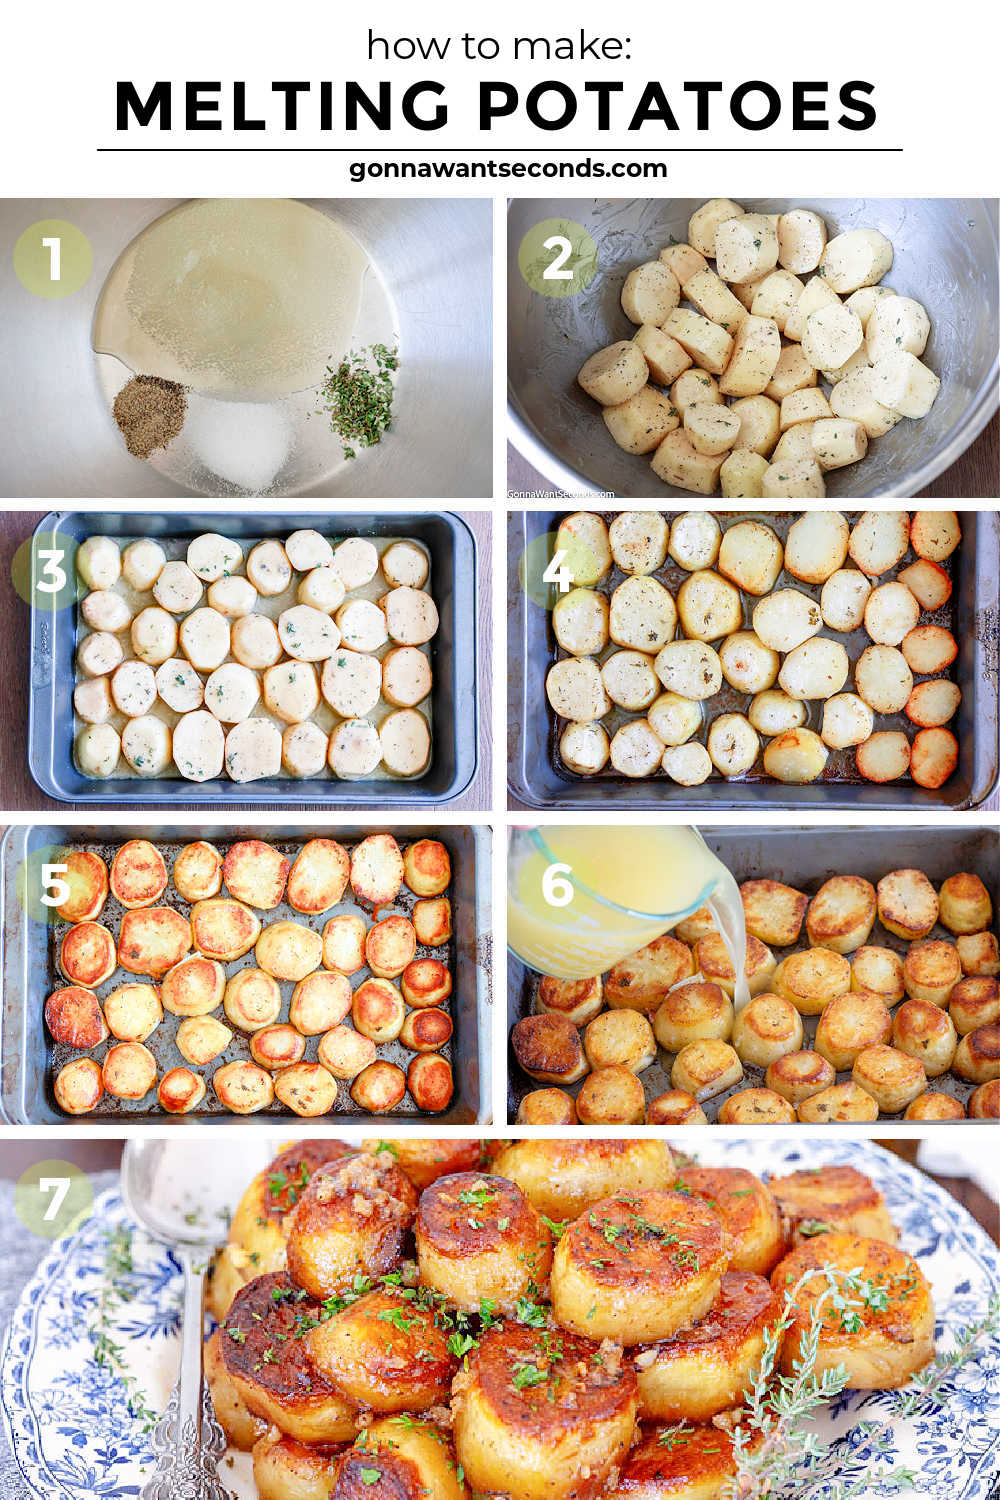 step by step how to make melting potatoes